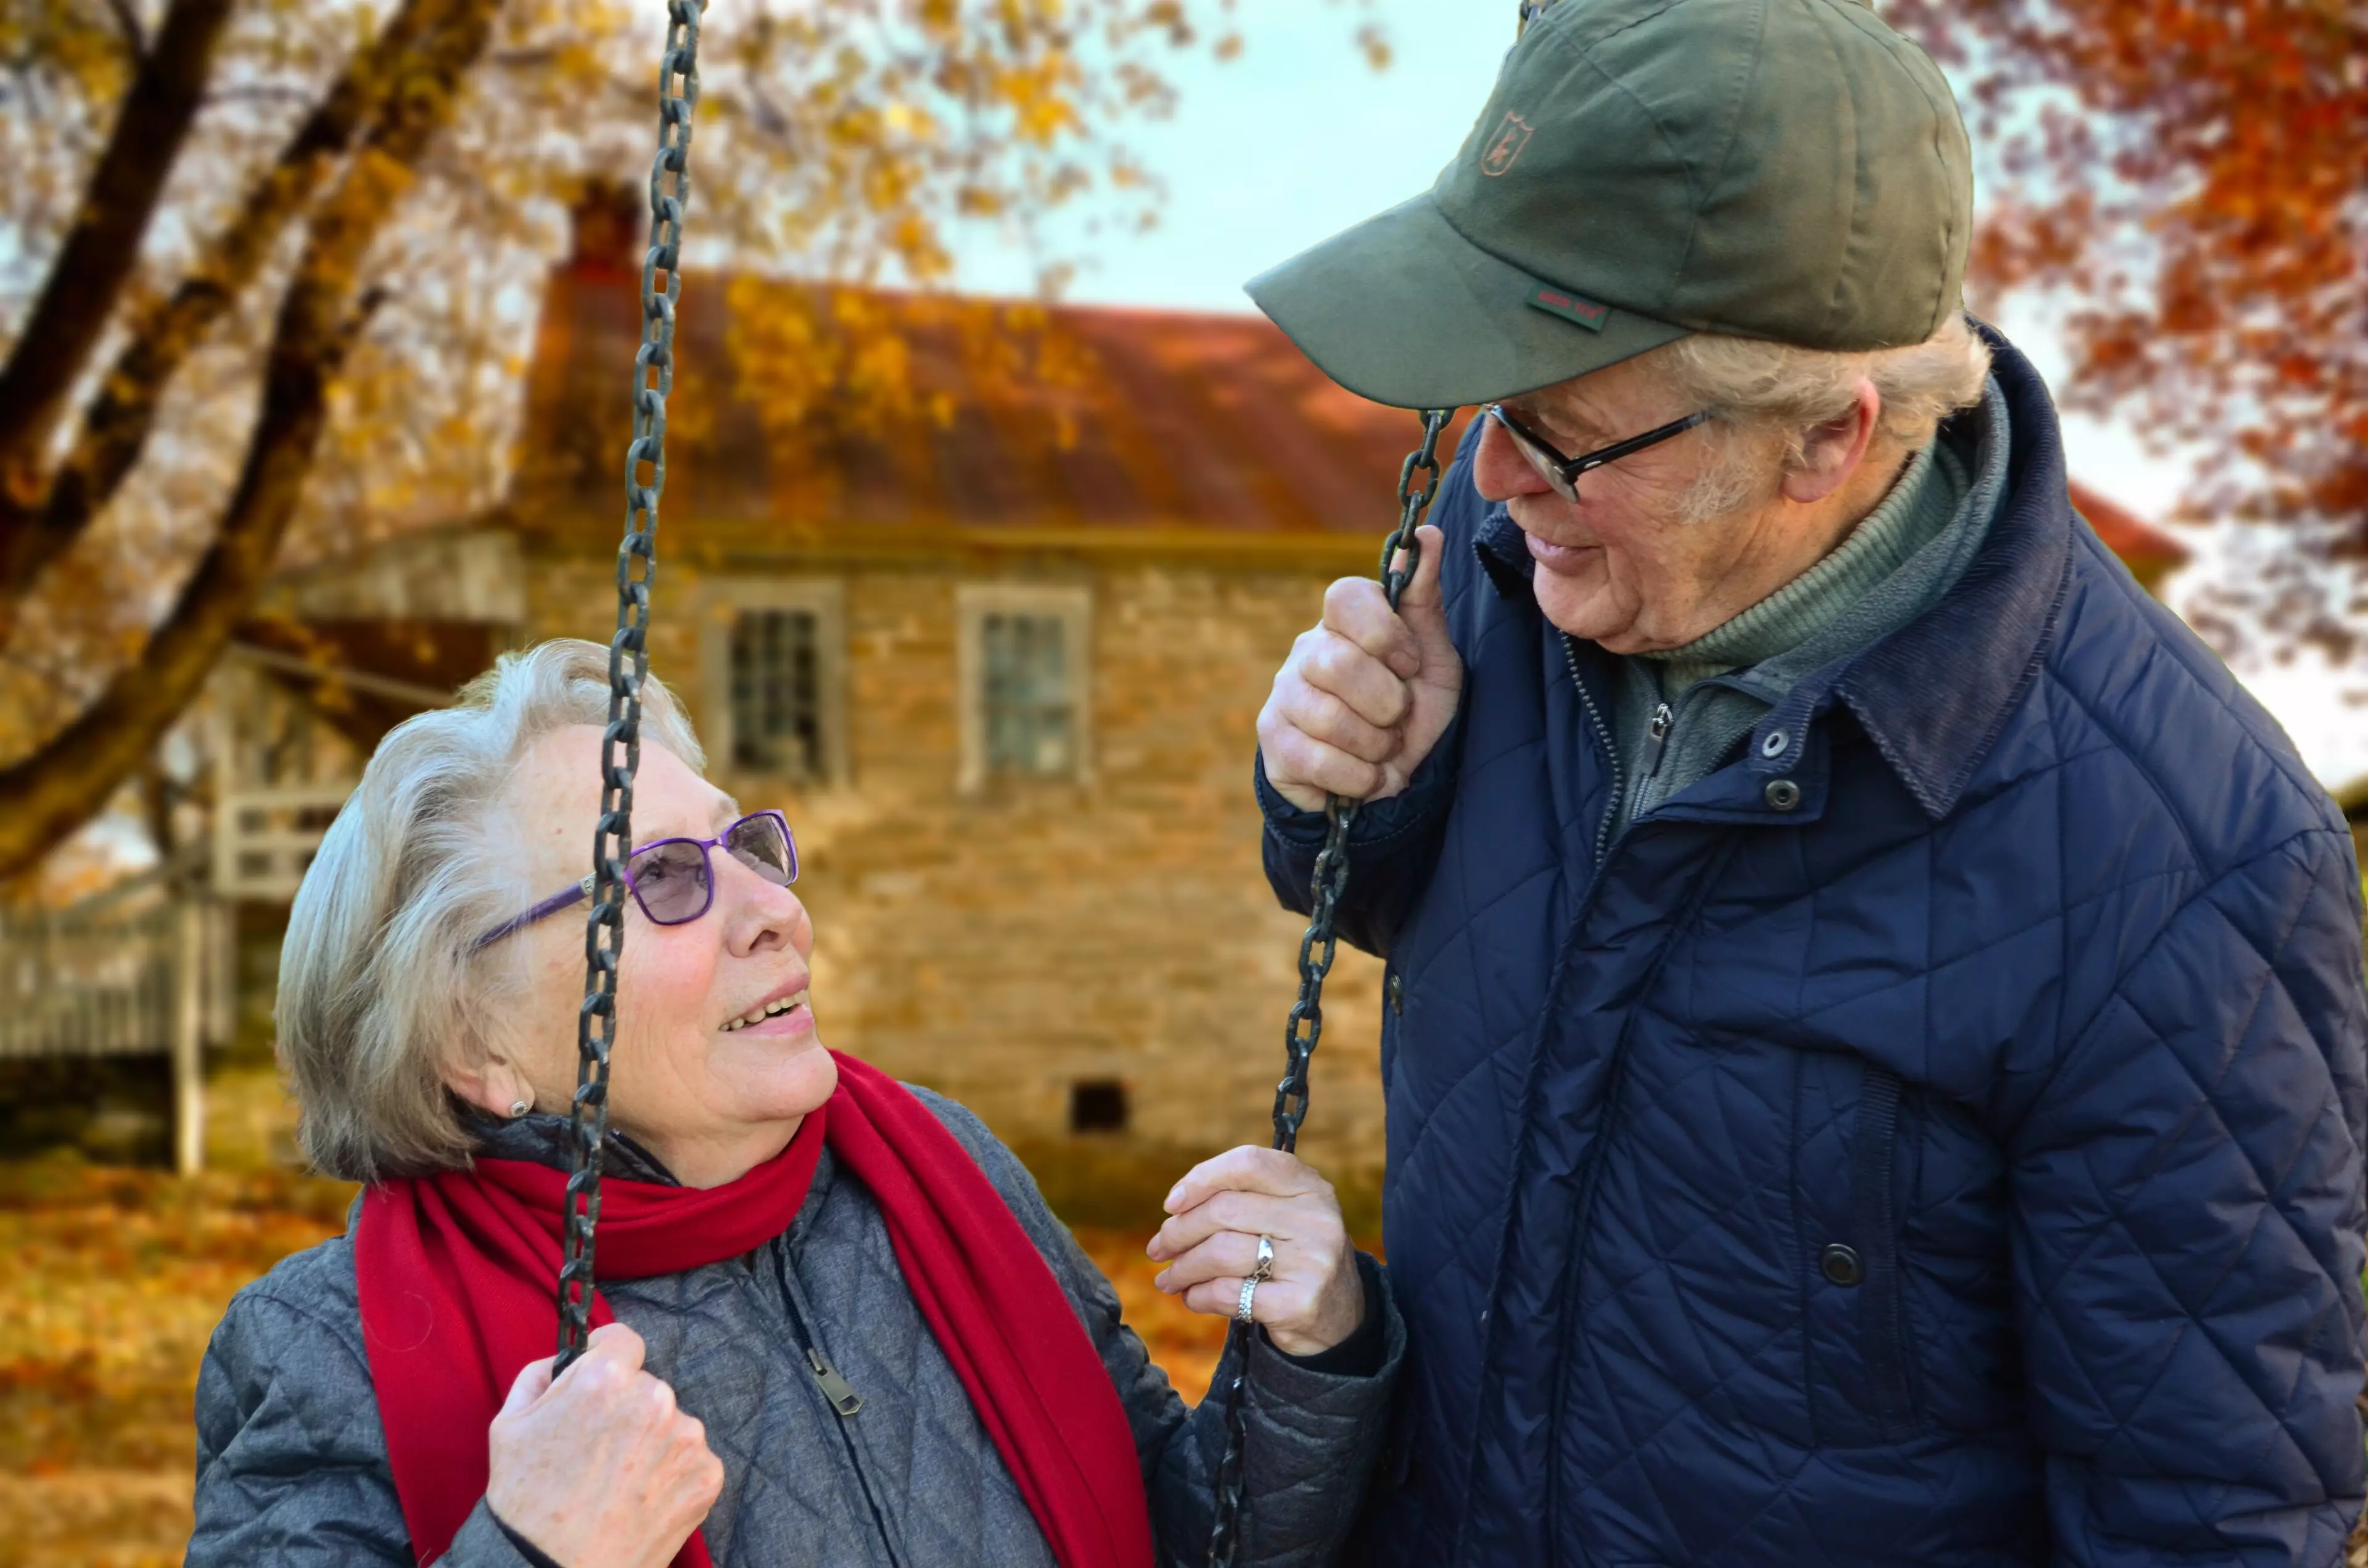 Charity Age UK warned that older people may not want to open the door to strangers (